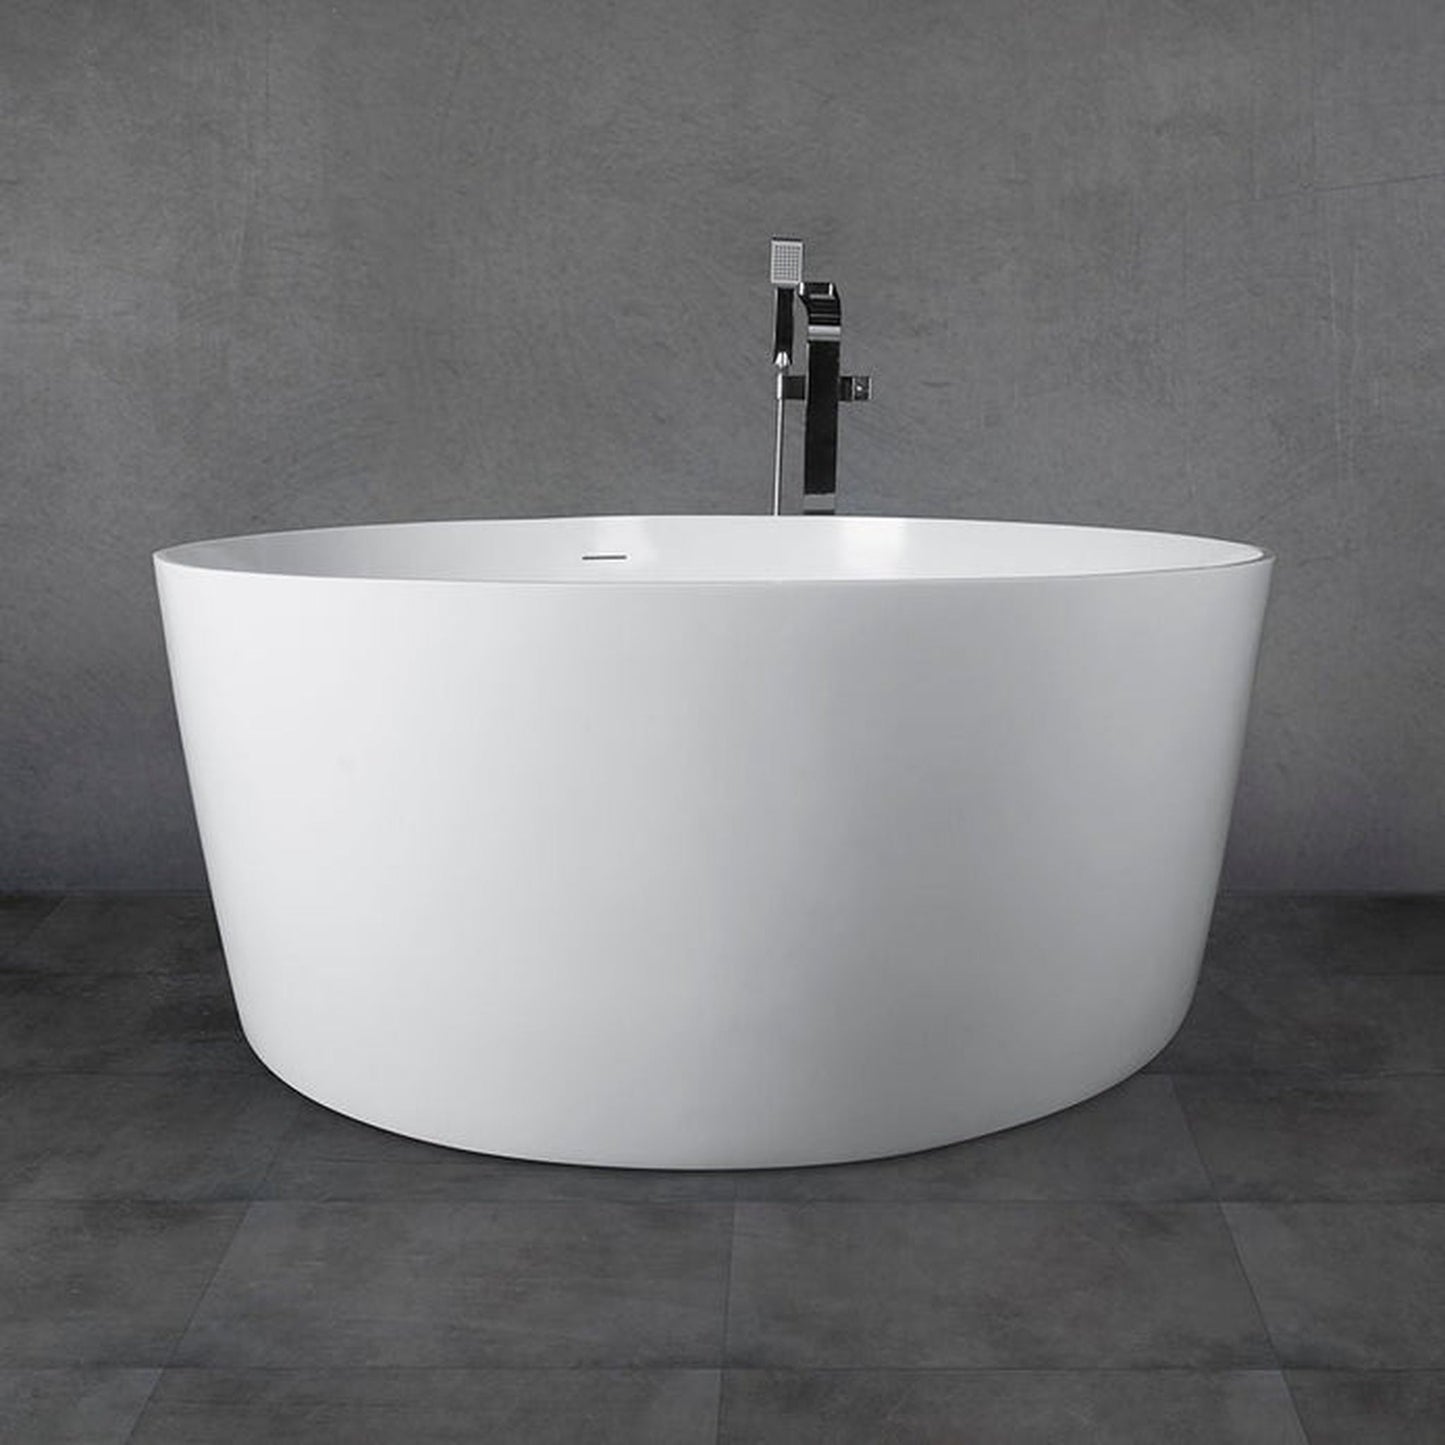 Vanity Art 55" x 55" White Matte Finish Freestanding Solid Surface Resin Stone Bathtub With Slotted Overflow and Pop-up Drain